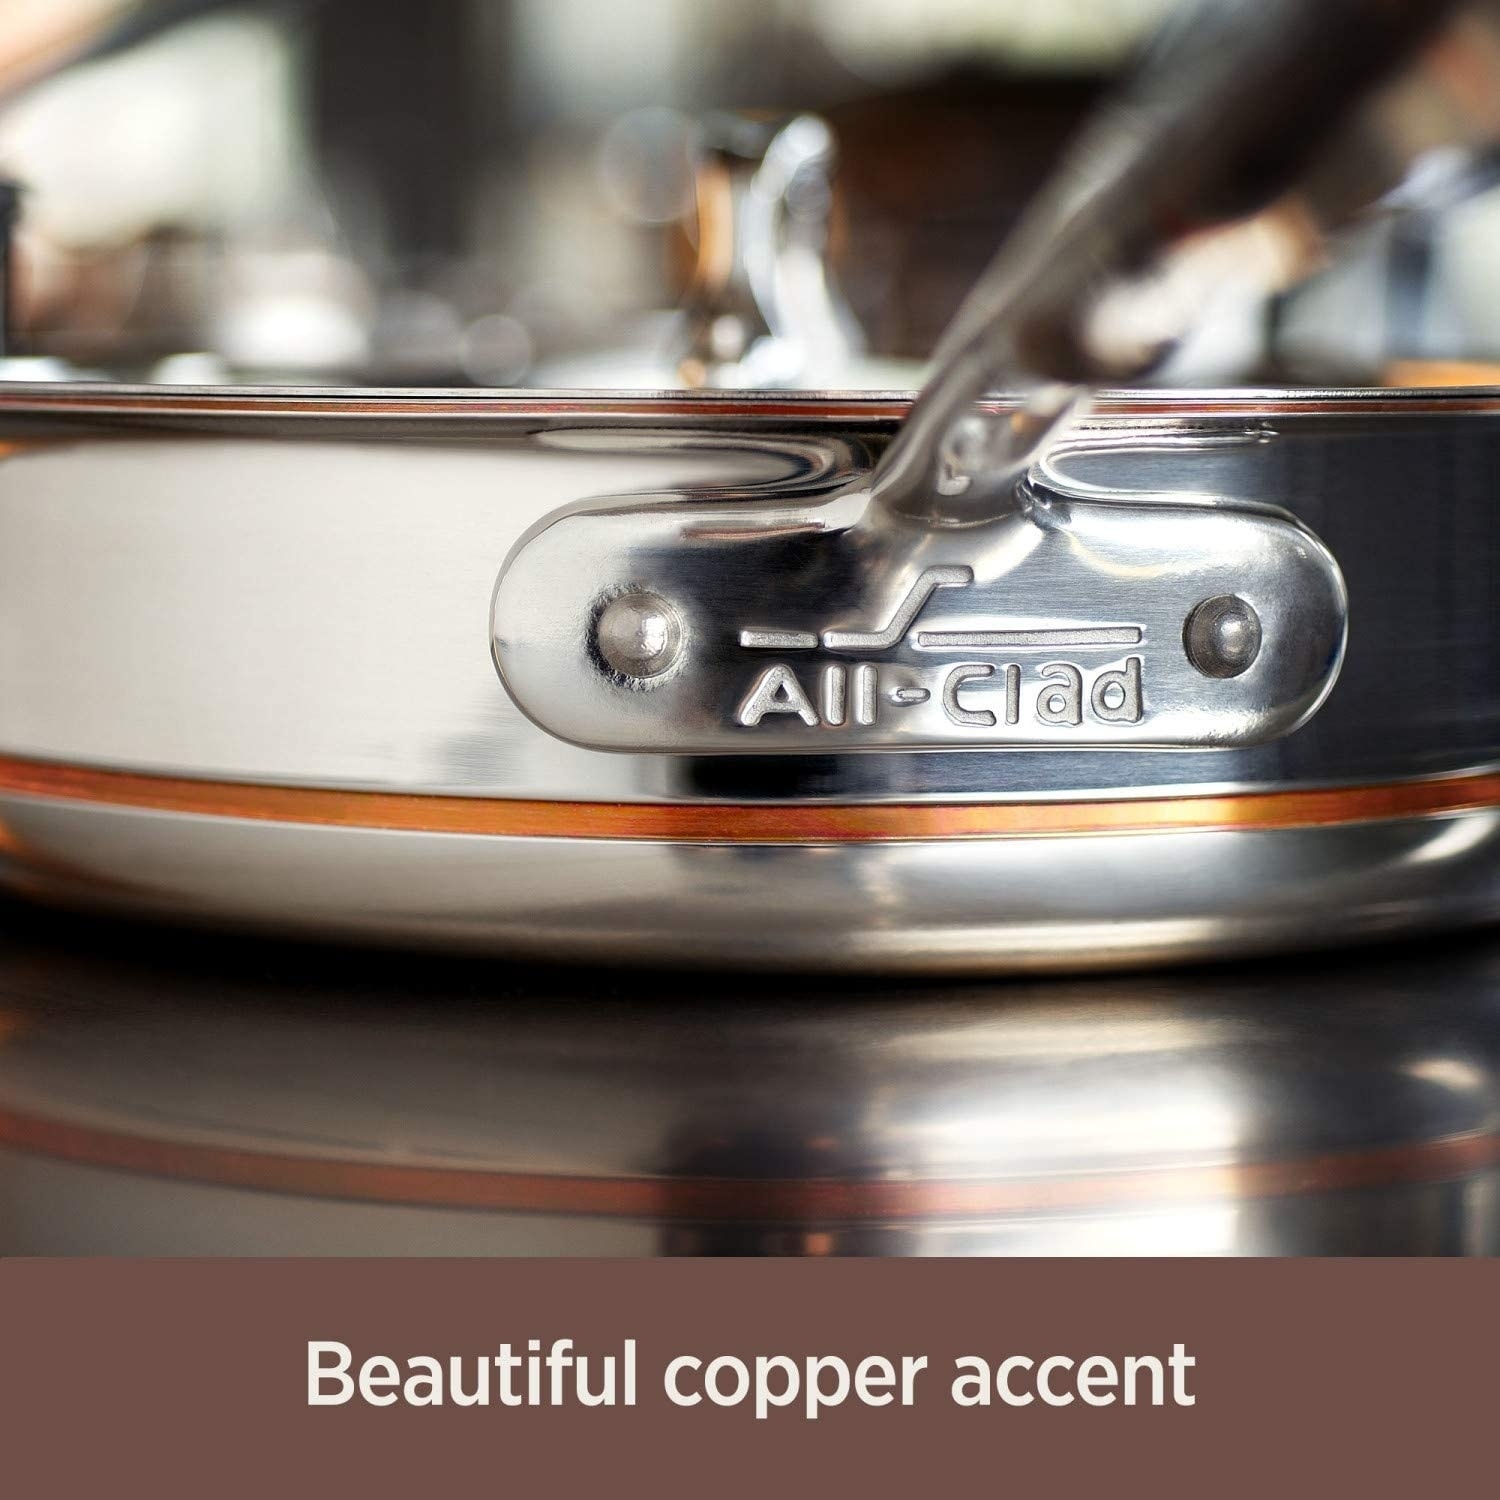 All-Clad Copper Core 5-Ply Stainless Steel Sauté Pan with Steel